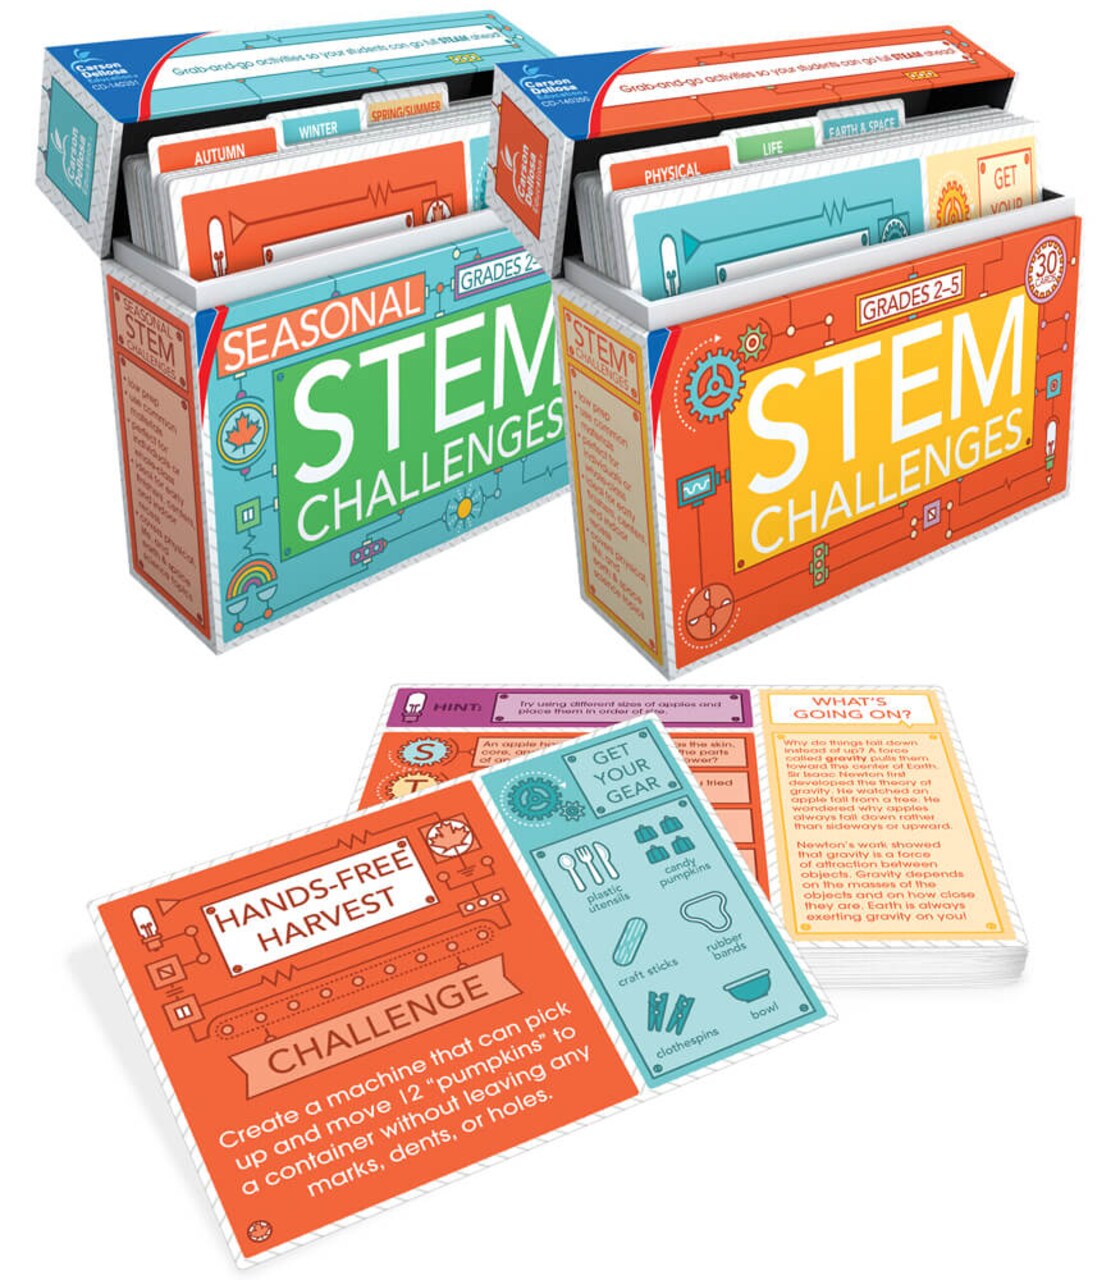 Carson Dellosa Stem Challenges Learning Cards Bundle, 2 Hands-On Science Kits for Kids Ages 8-12, 60 Stem Projects, Educational Science Kits, Stem Education Kit for Homeschool or Classroom